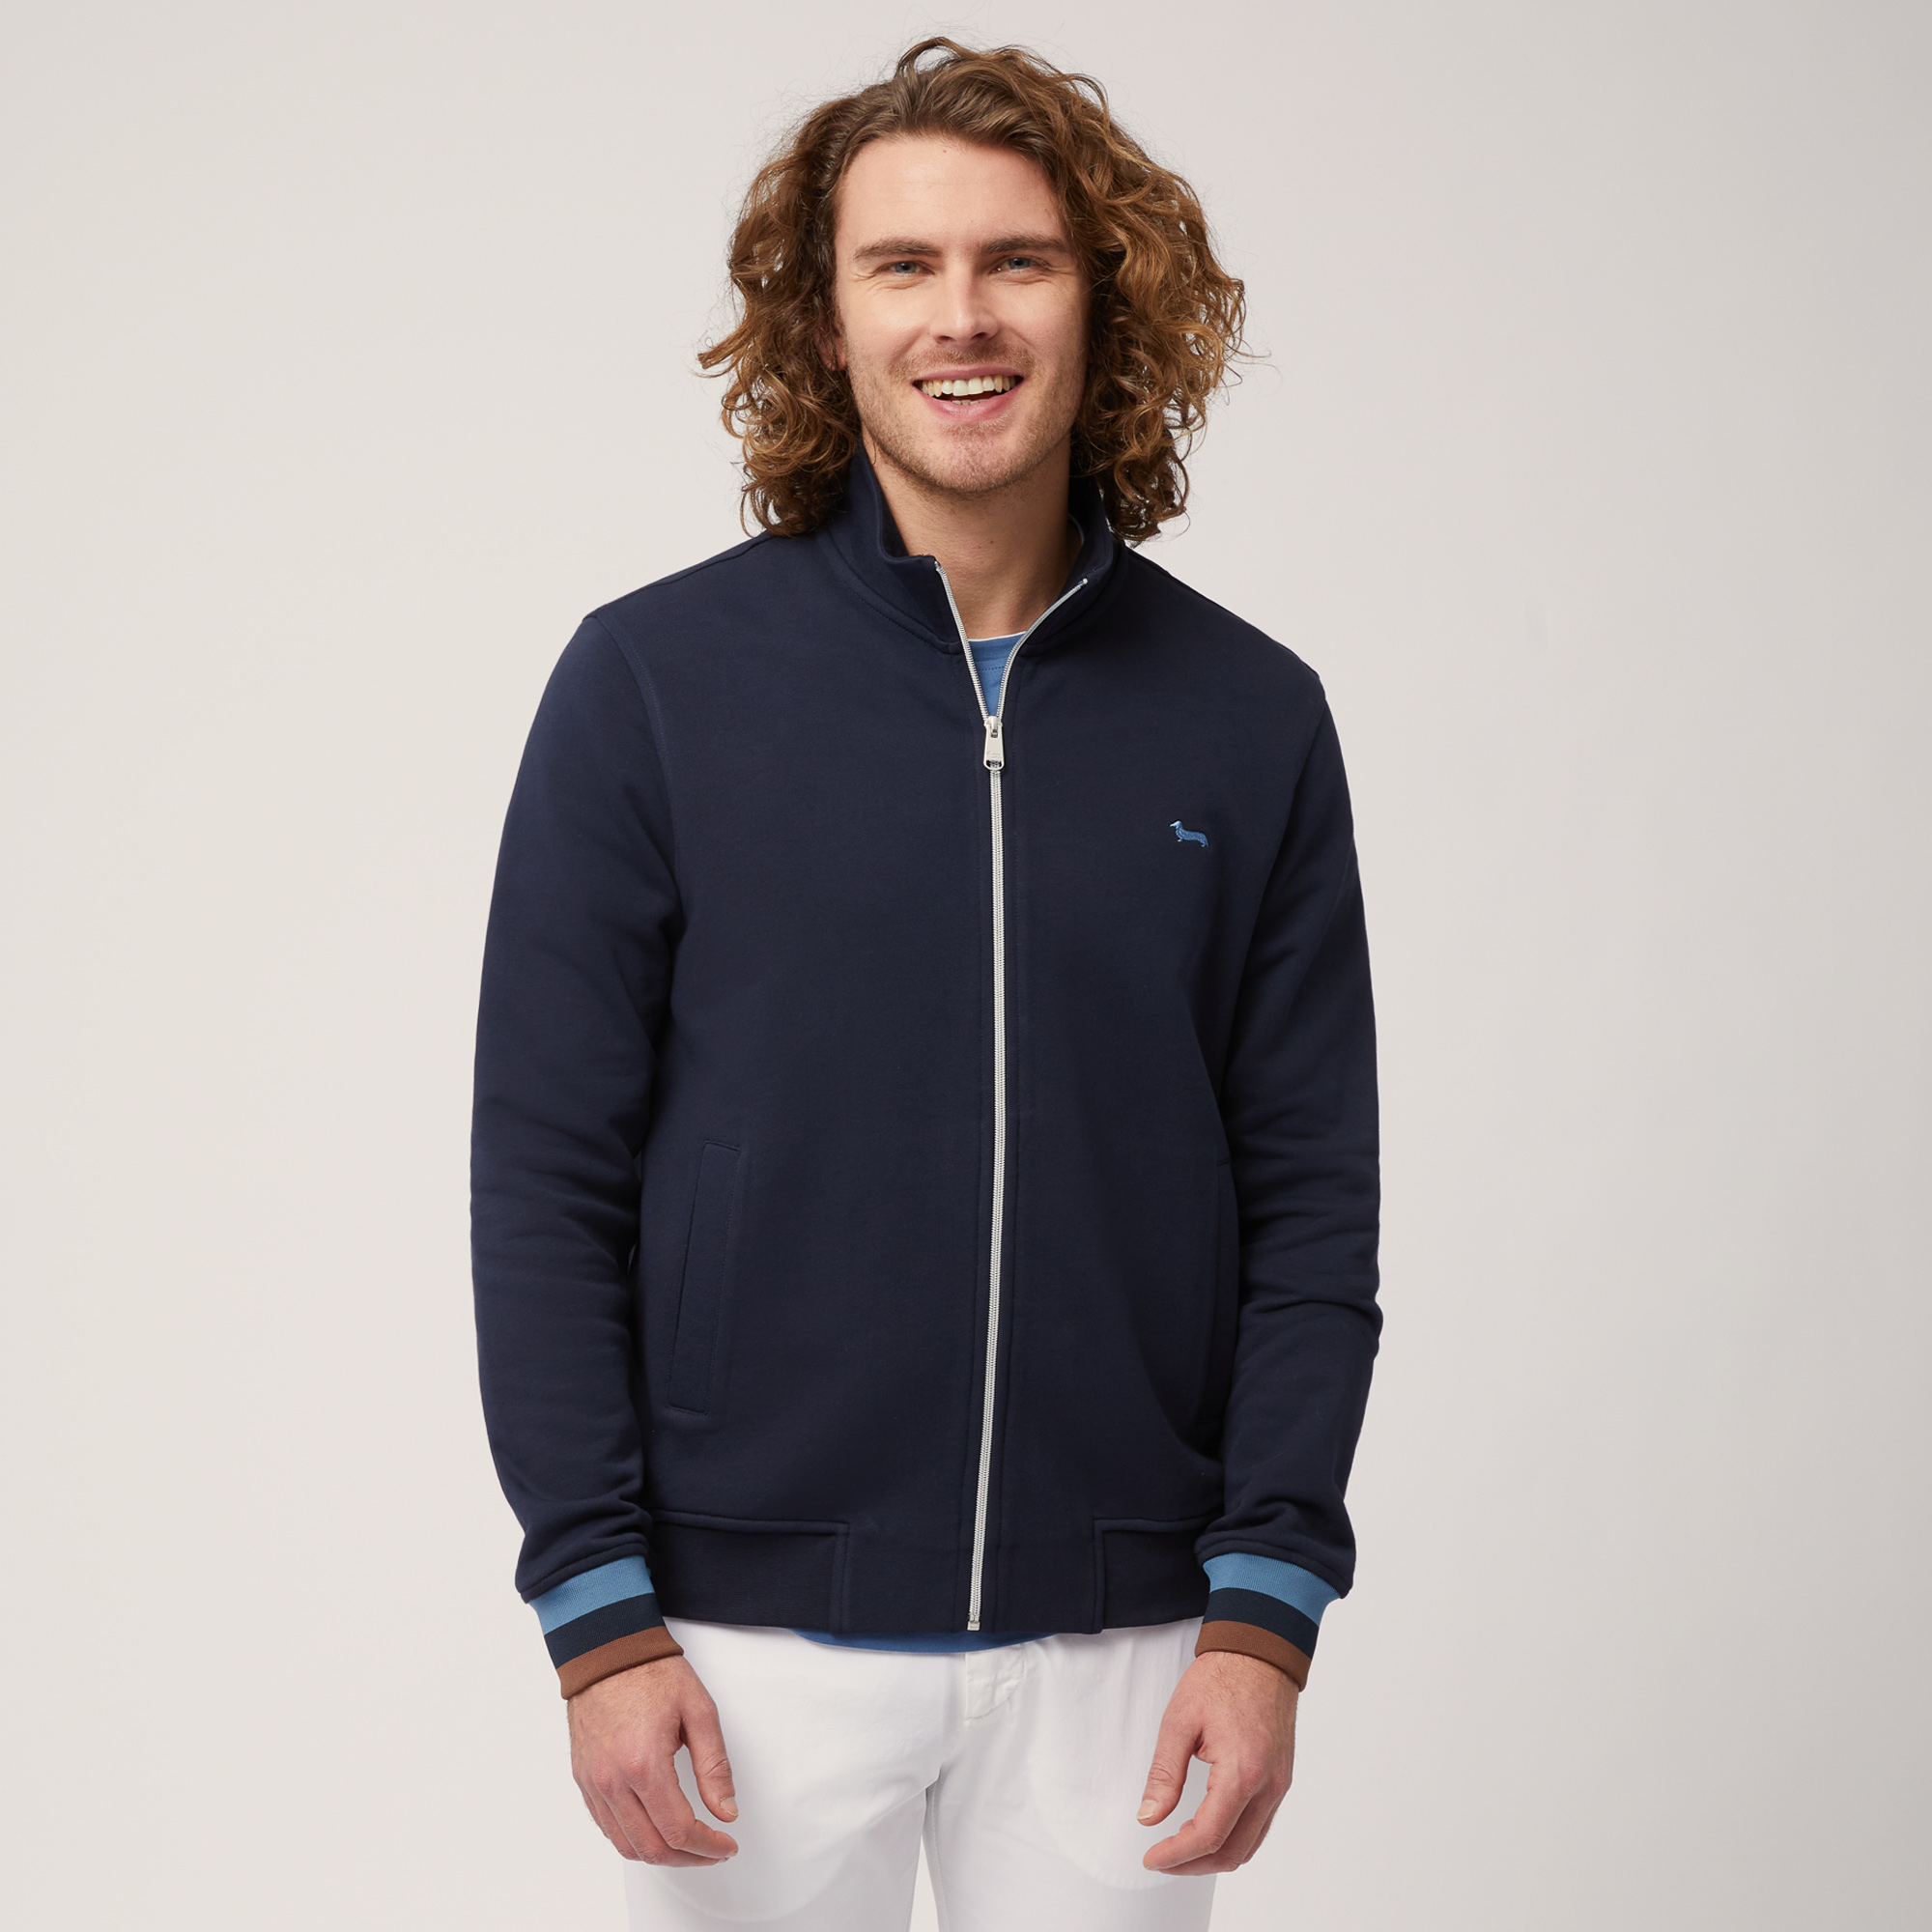 Cotton Full-Zip Sweatshirt with Striped Details, Blue, large